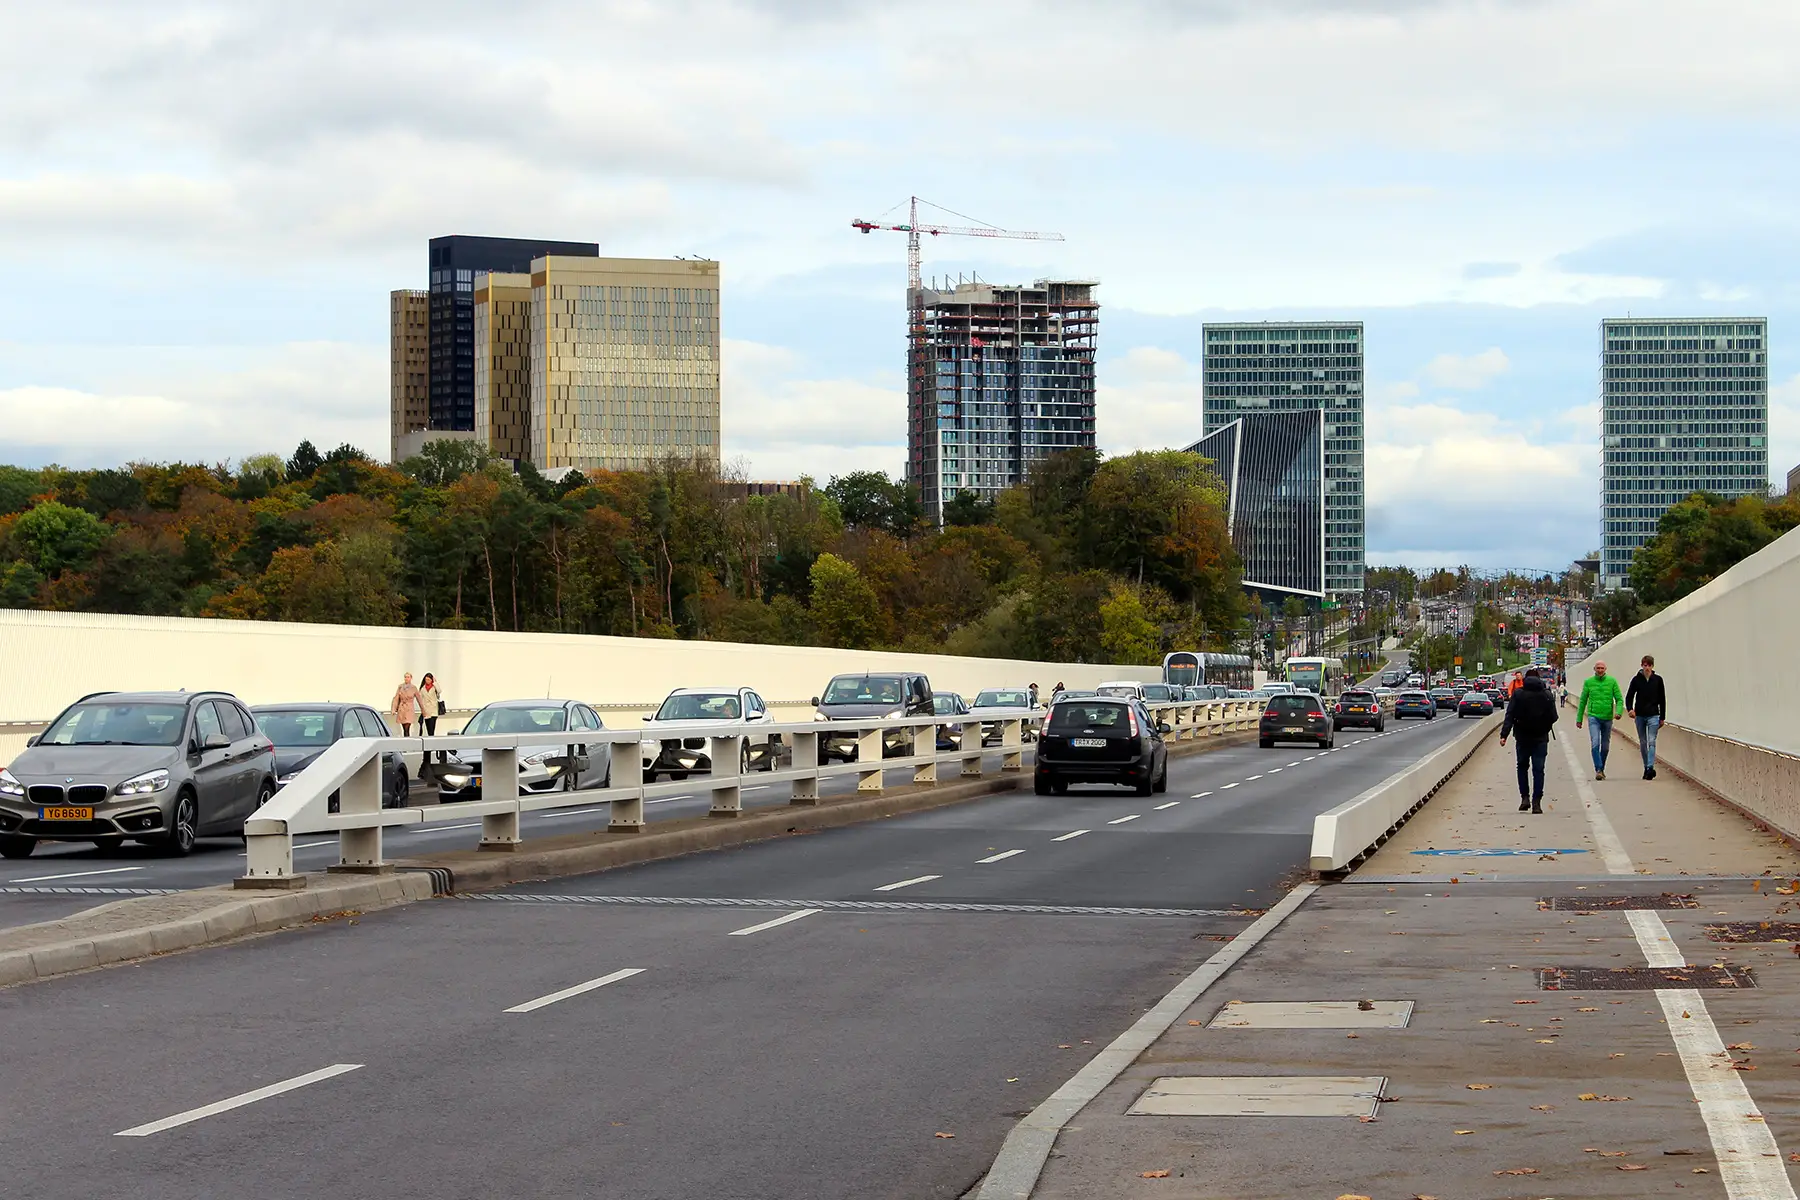 Traffic on the Red Bridge in Luxembourg, skyscrapers in the background